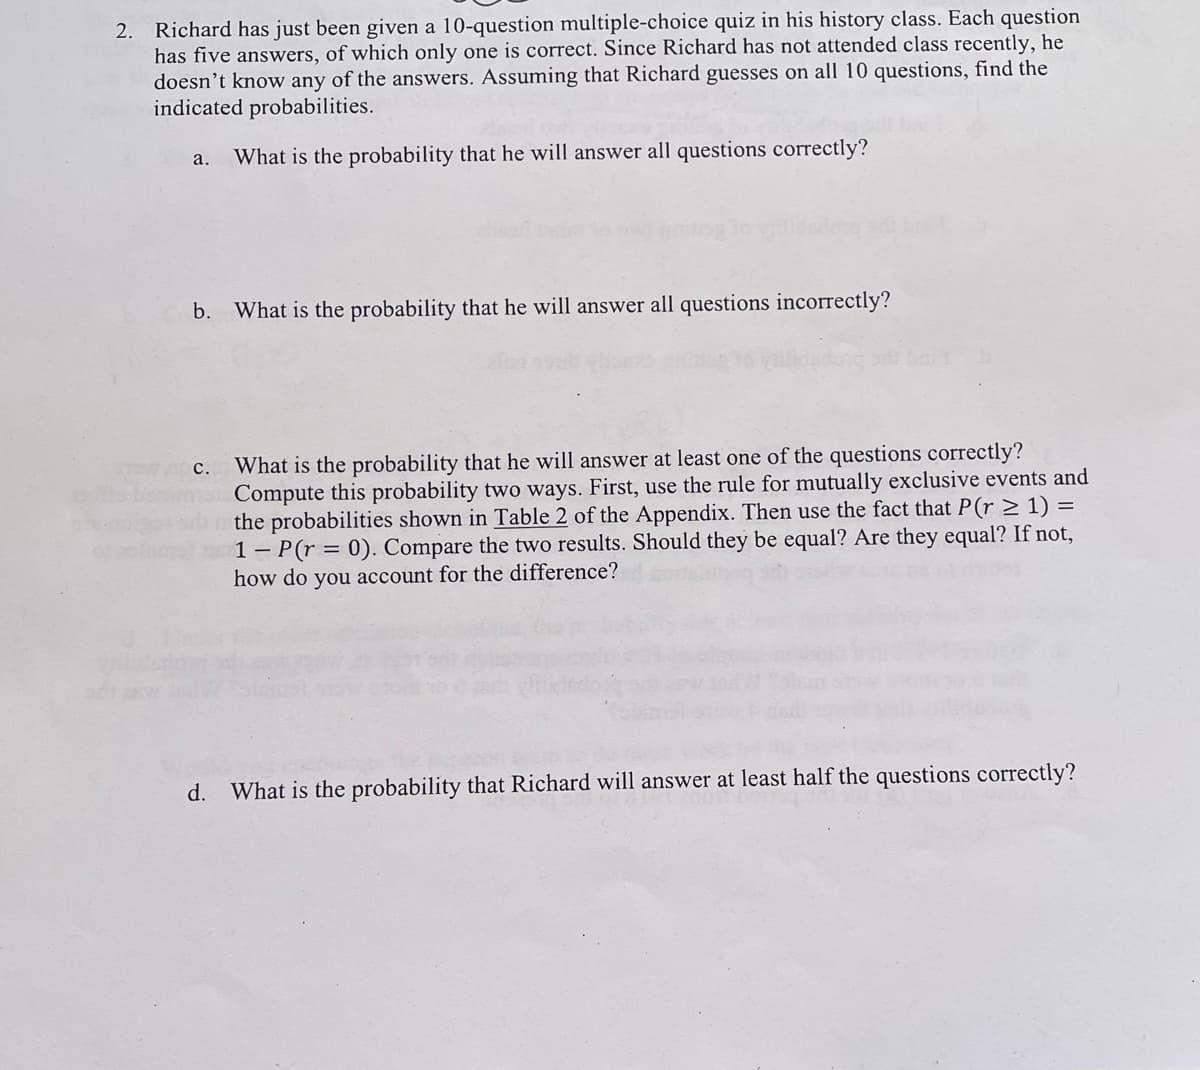 2. Richard has just been given a 10-question multiple-choice quiz in his history class. Each question
has five answers, of which only one is correct. Since Richard has not attended class recently, he
doesn't know any of the answers. Assuming that Richard guesses on all 10 questions, find the
indicated probabilities.
a.
What is the probability that he will answer all questions correctly?
b. What is the probability that he will answer all questions incorrectly?
c. What is the probability that he will answer at least one of the questions correctly?
Compute this probability two ways. First, use the rule for mutually exclusive events and
the probabilities shown in Table 2 of the Appendix. Then use the fact that P(r ≥ 1) =
1 P(r = 0). Compare the two results. Should they be equal? Are they equal? If not,
how do you account for the difference?
d. What is the probability that Richard will answer at least half the questions correctly?